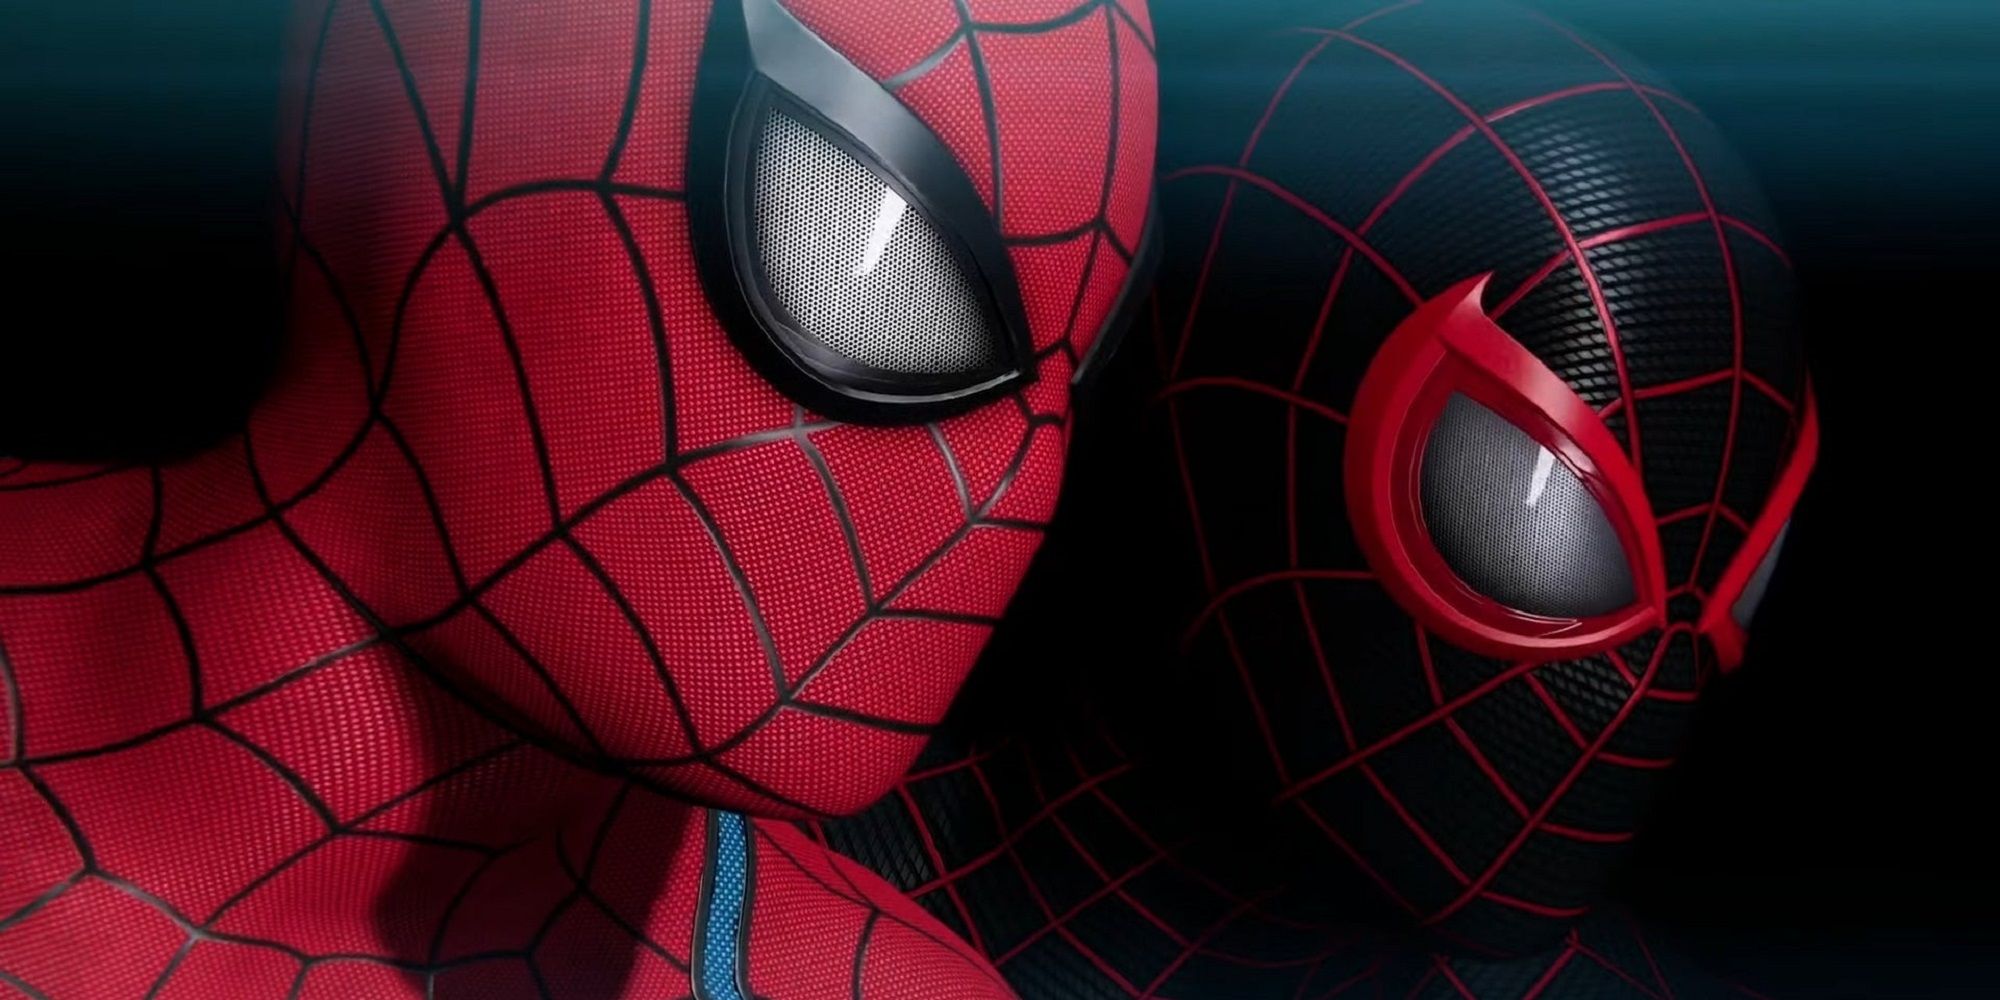 Marvel's Spider-Man 2 Appears On PlayStation Store With New Logo